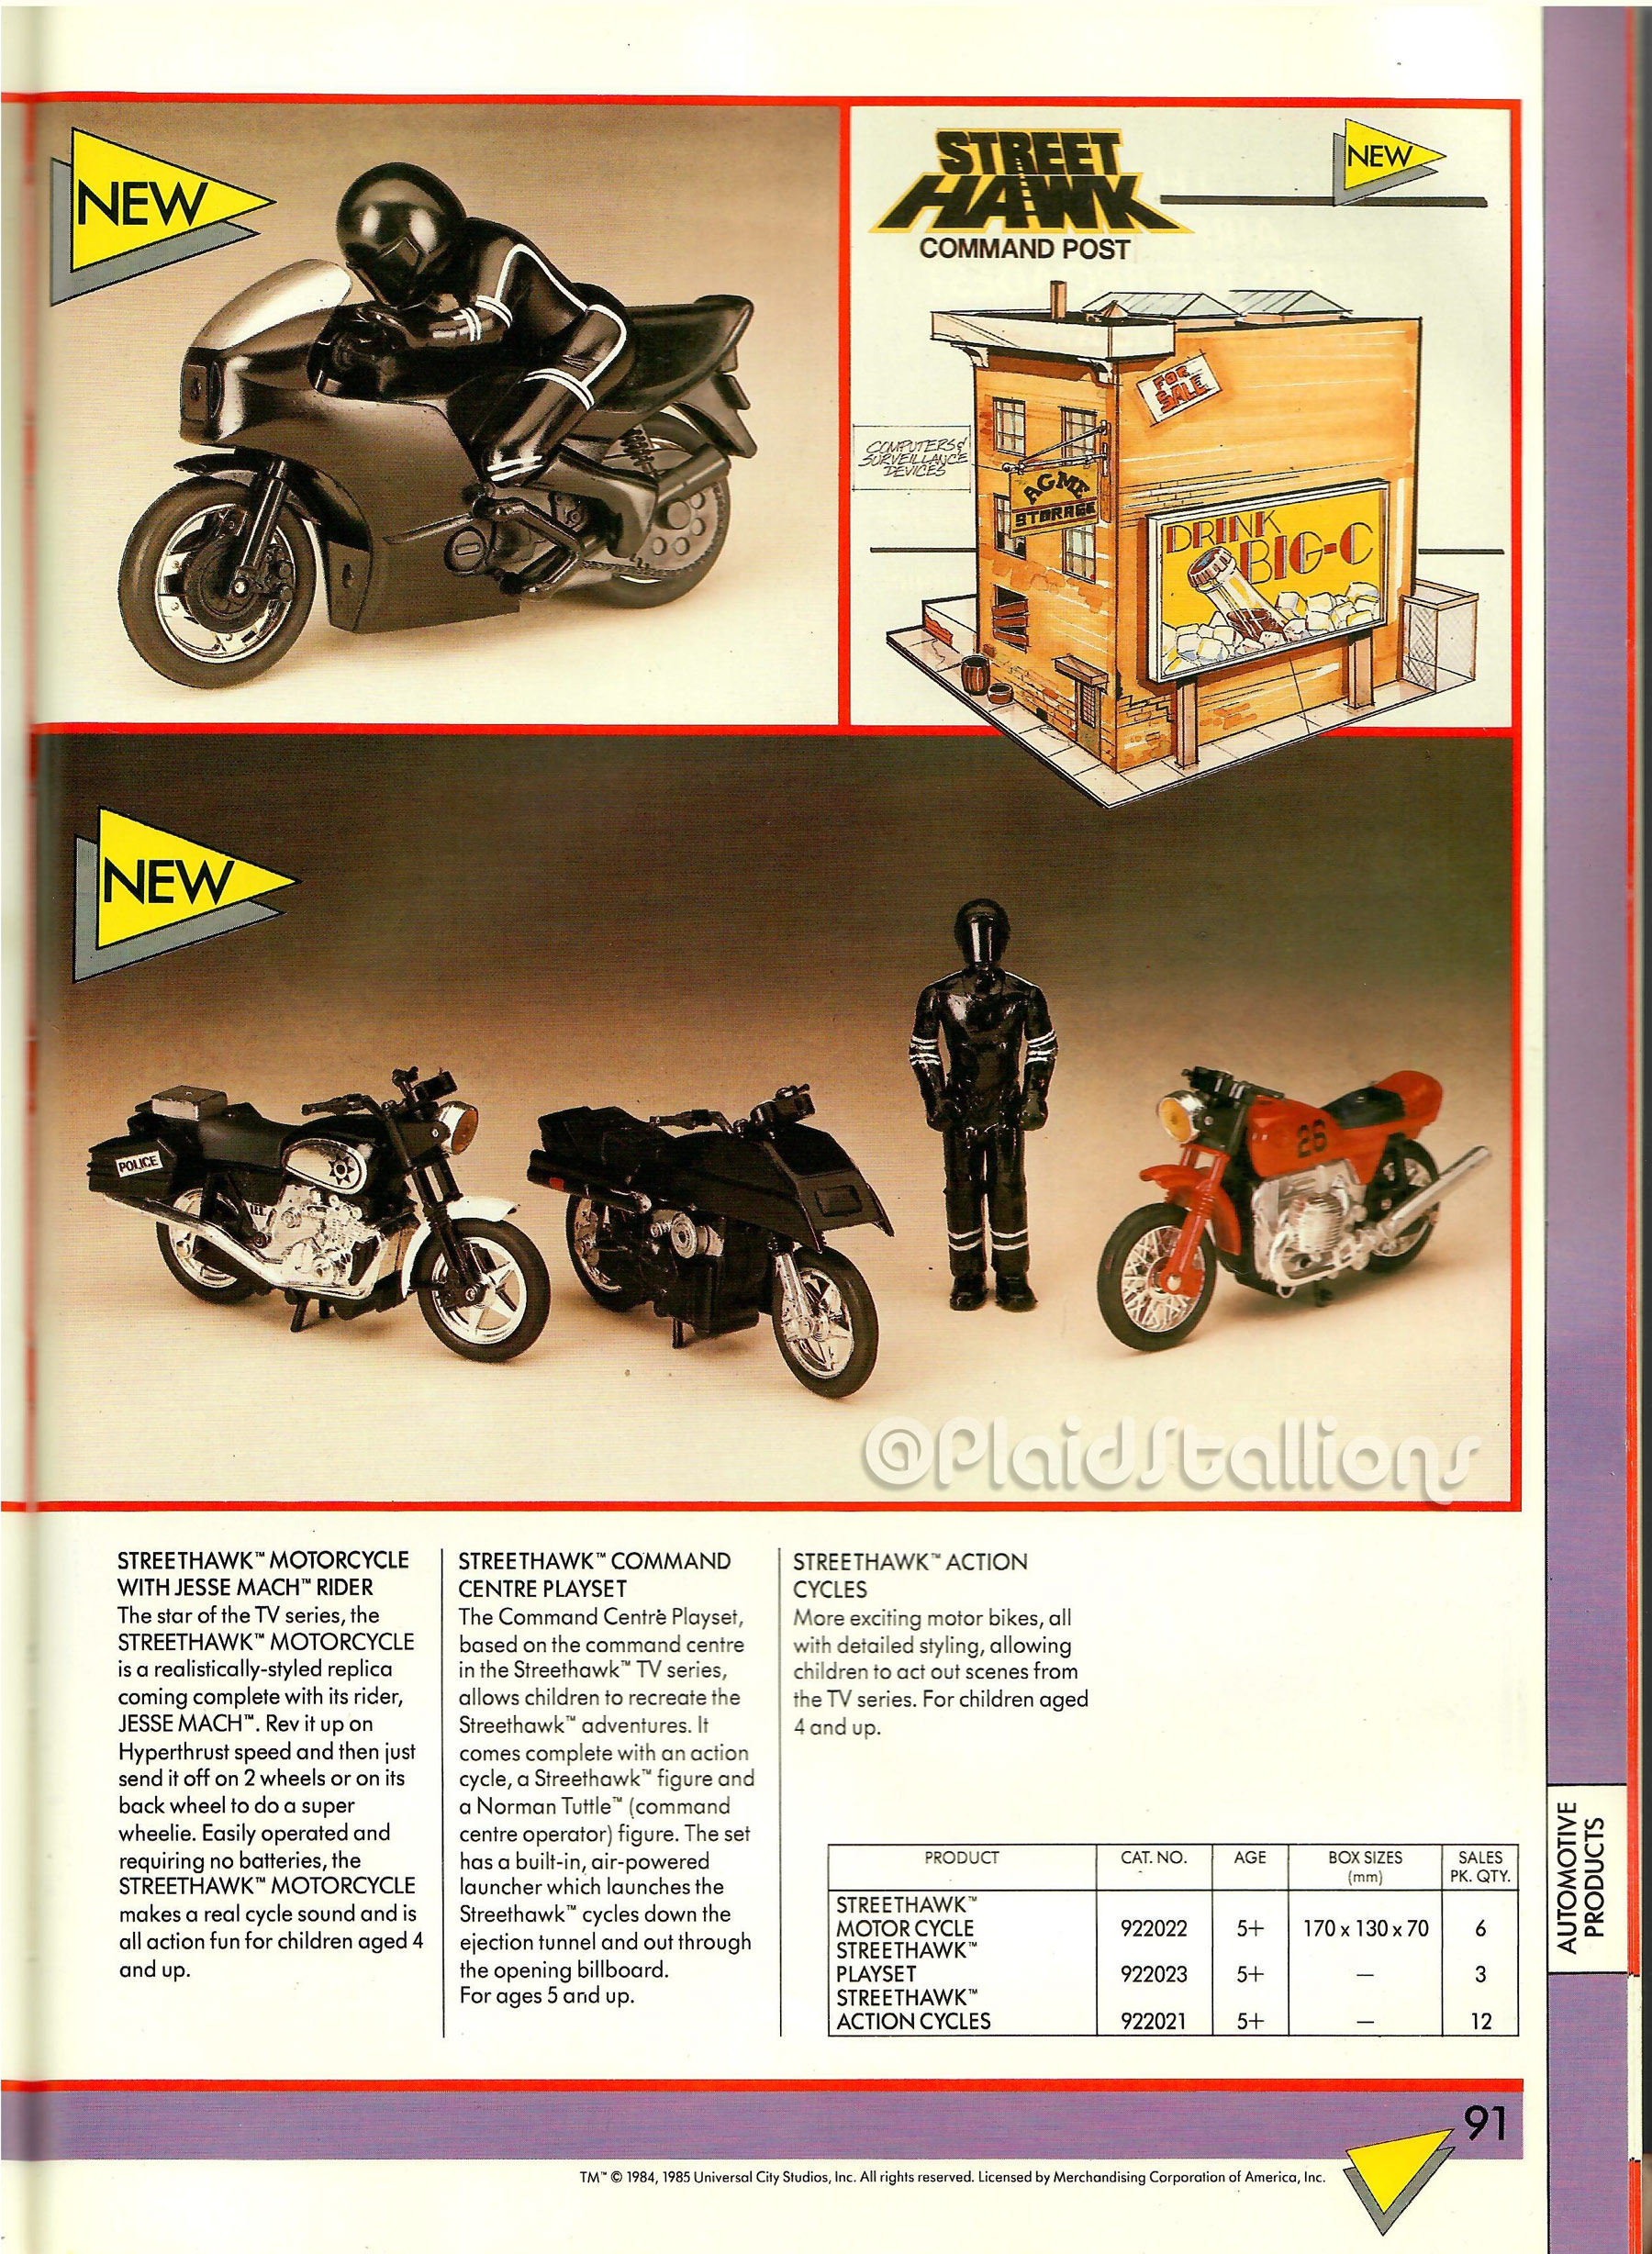 Kenner Knight Rider and Street Hawk in 1985 Palitoy Catalog-